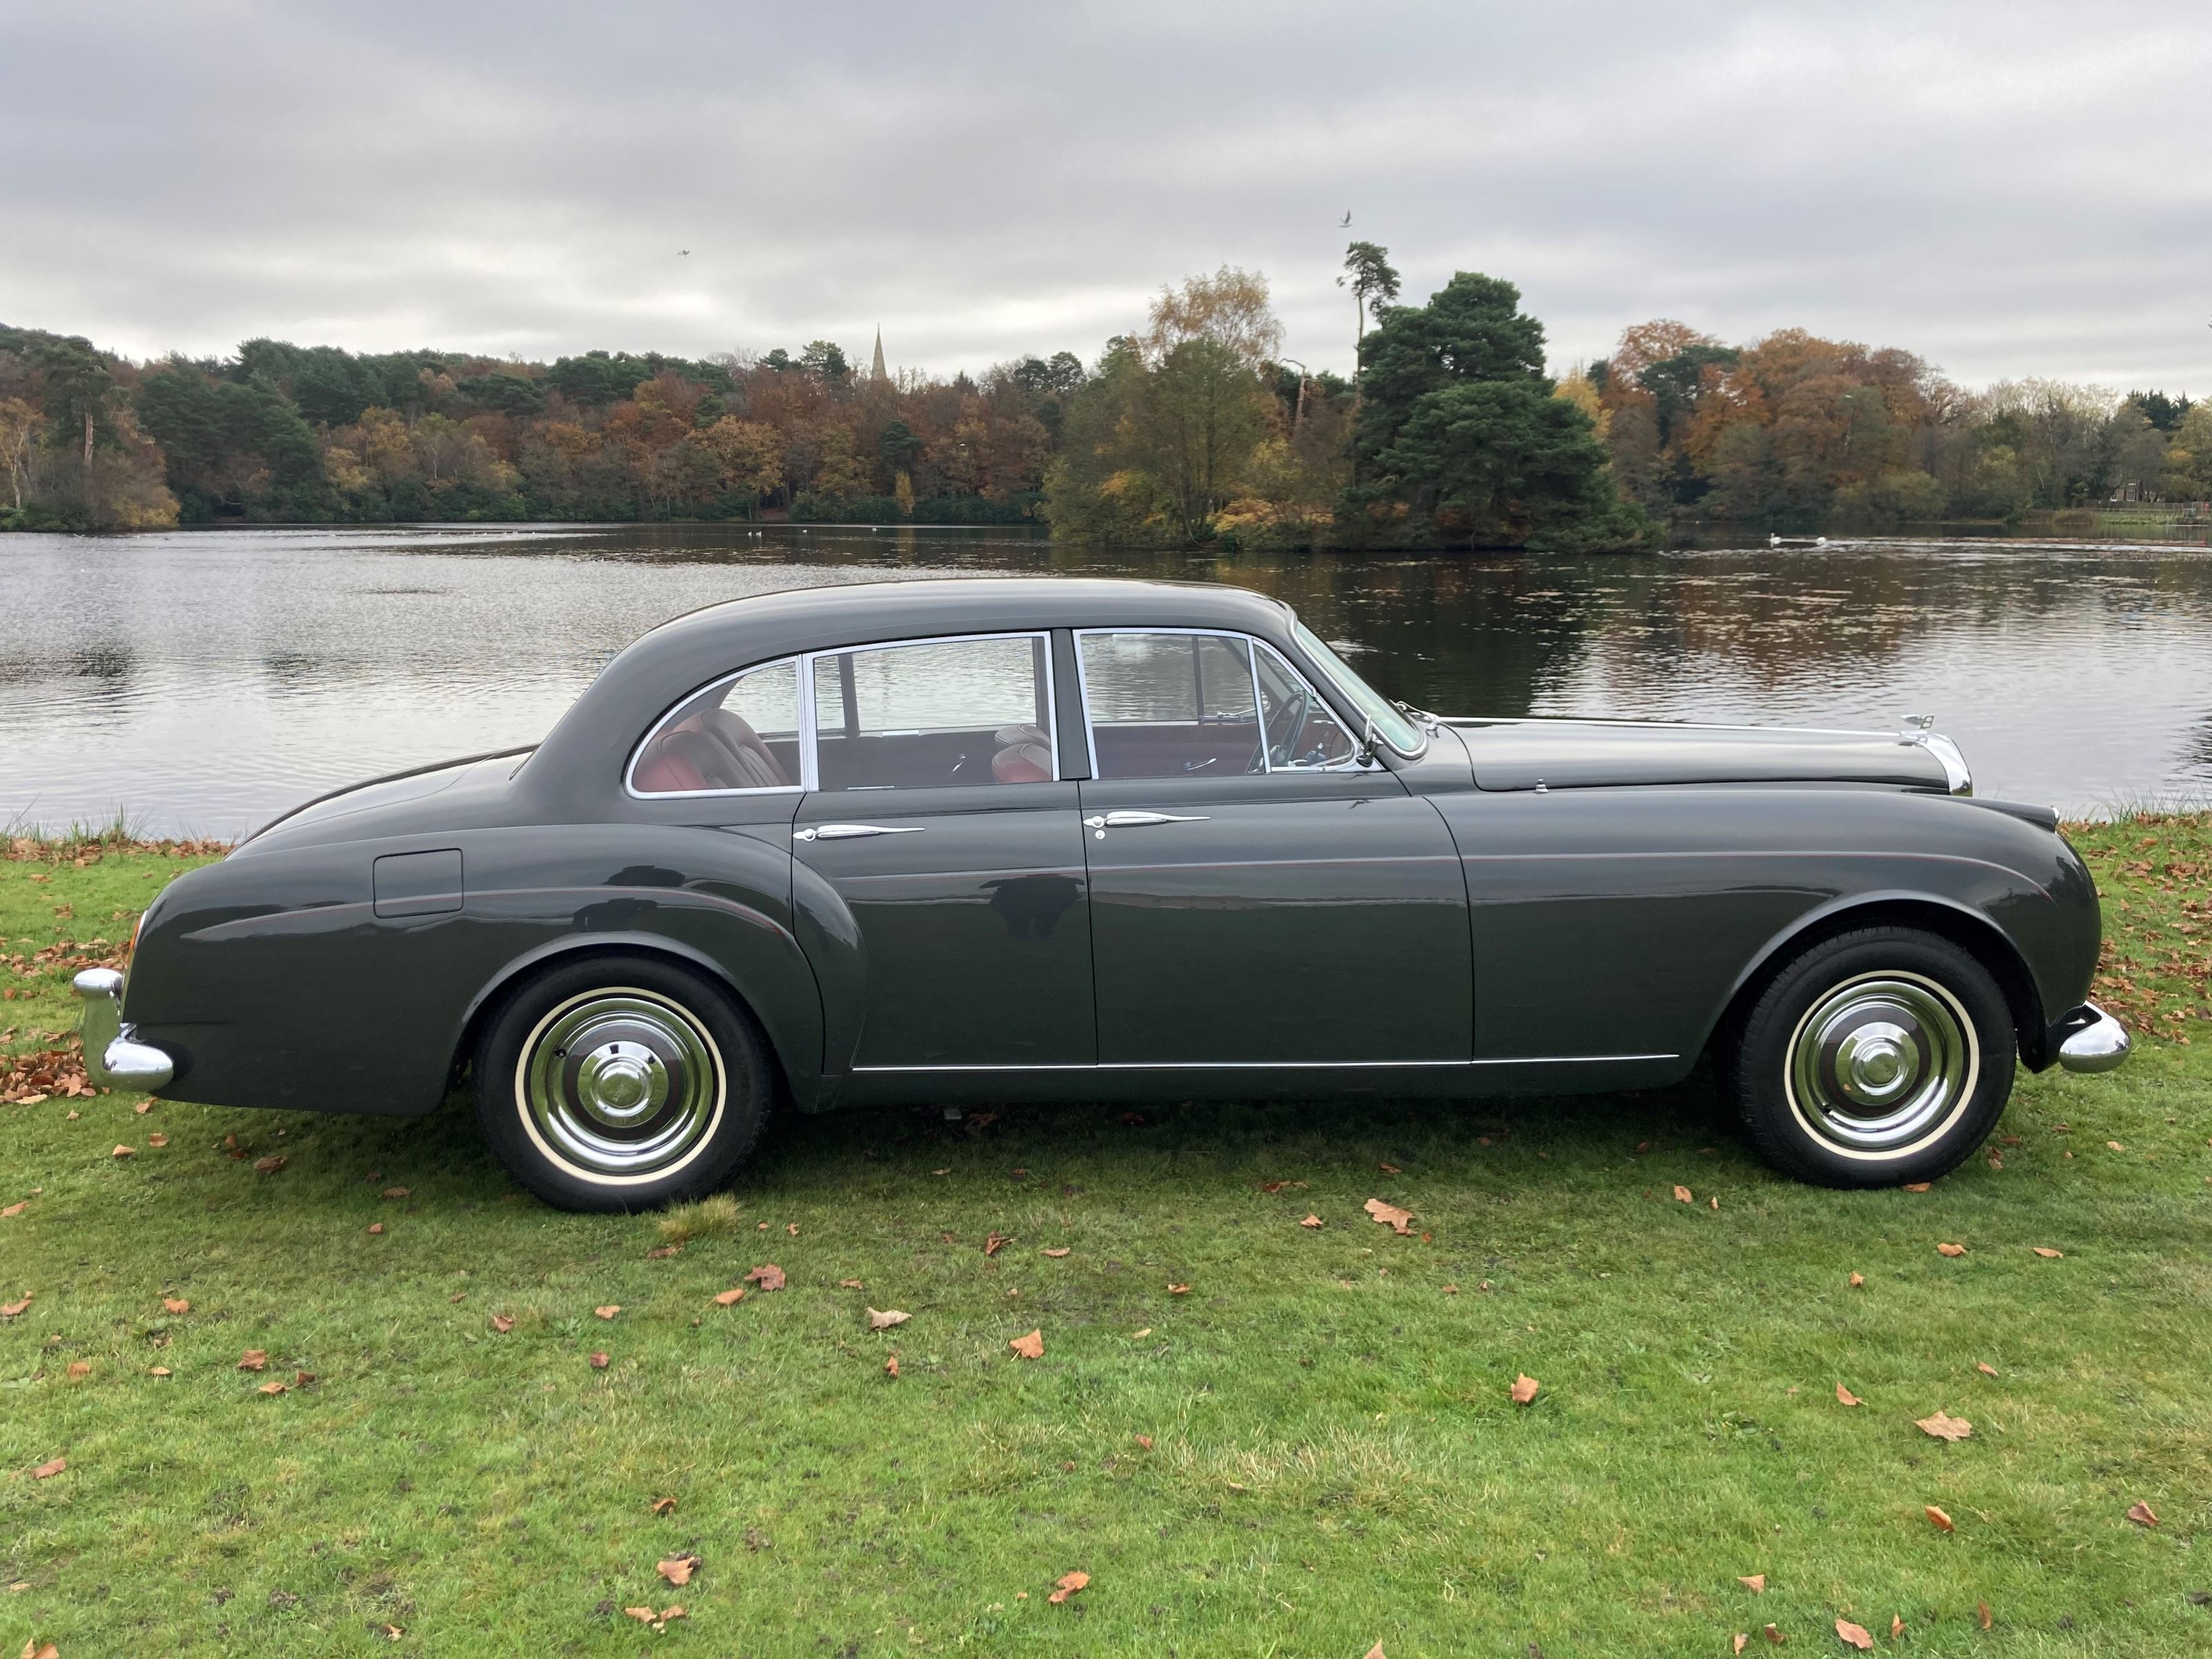 Bentley s1 continental  zx4hxgd38w7ip3b5qnpgy